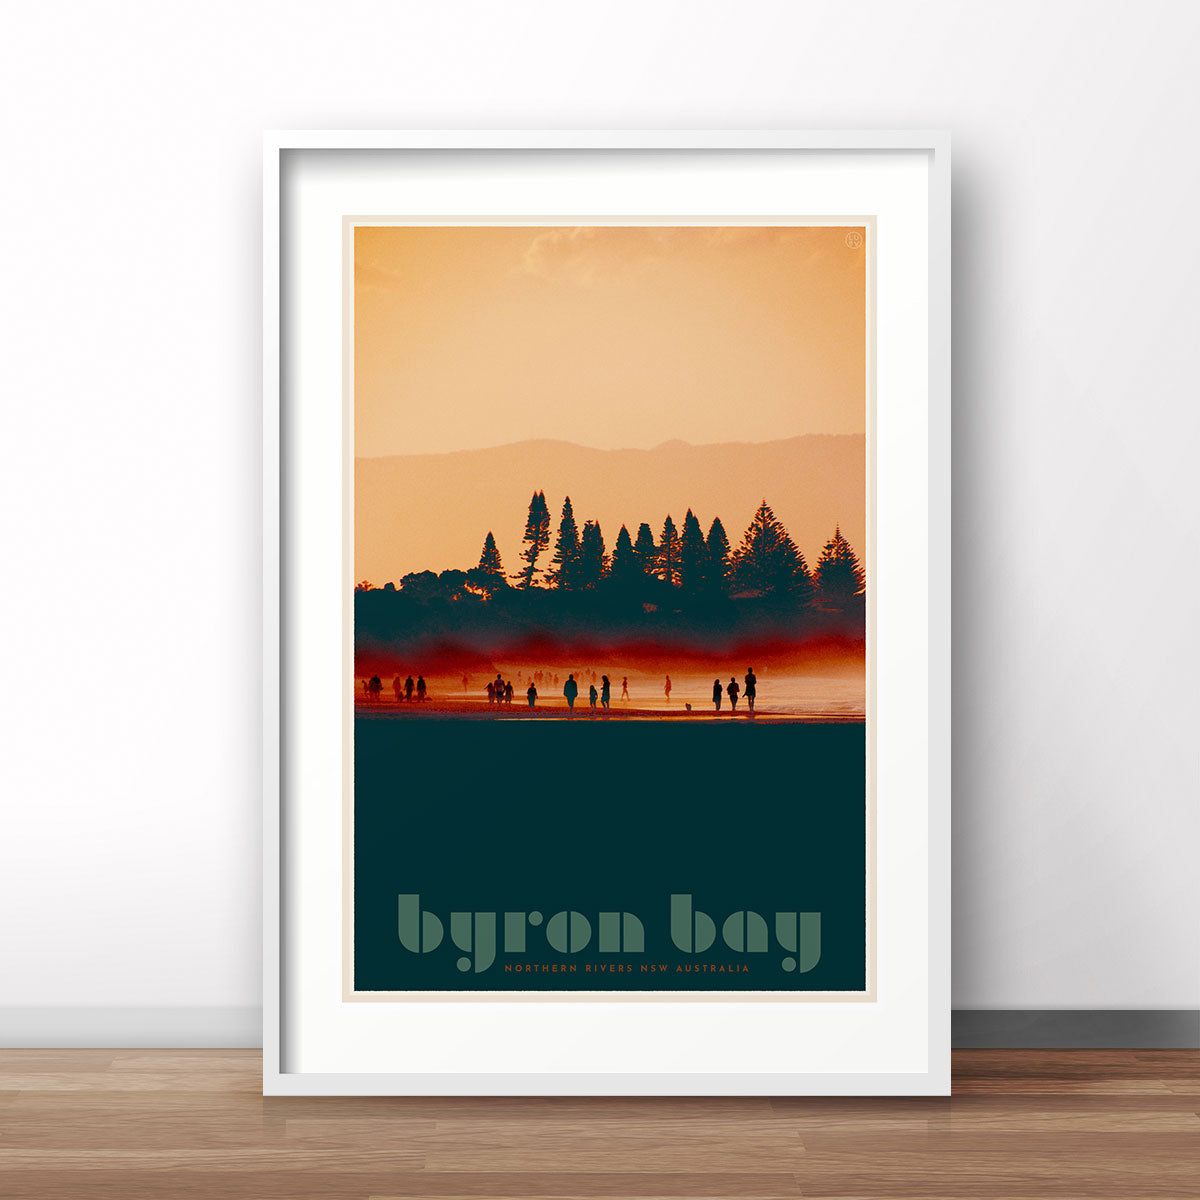 Byron Bay Beach retro vintage poster print by Places We Luv